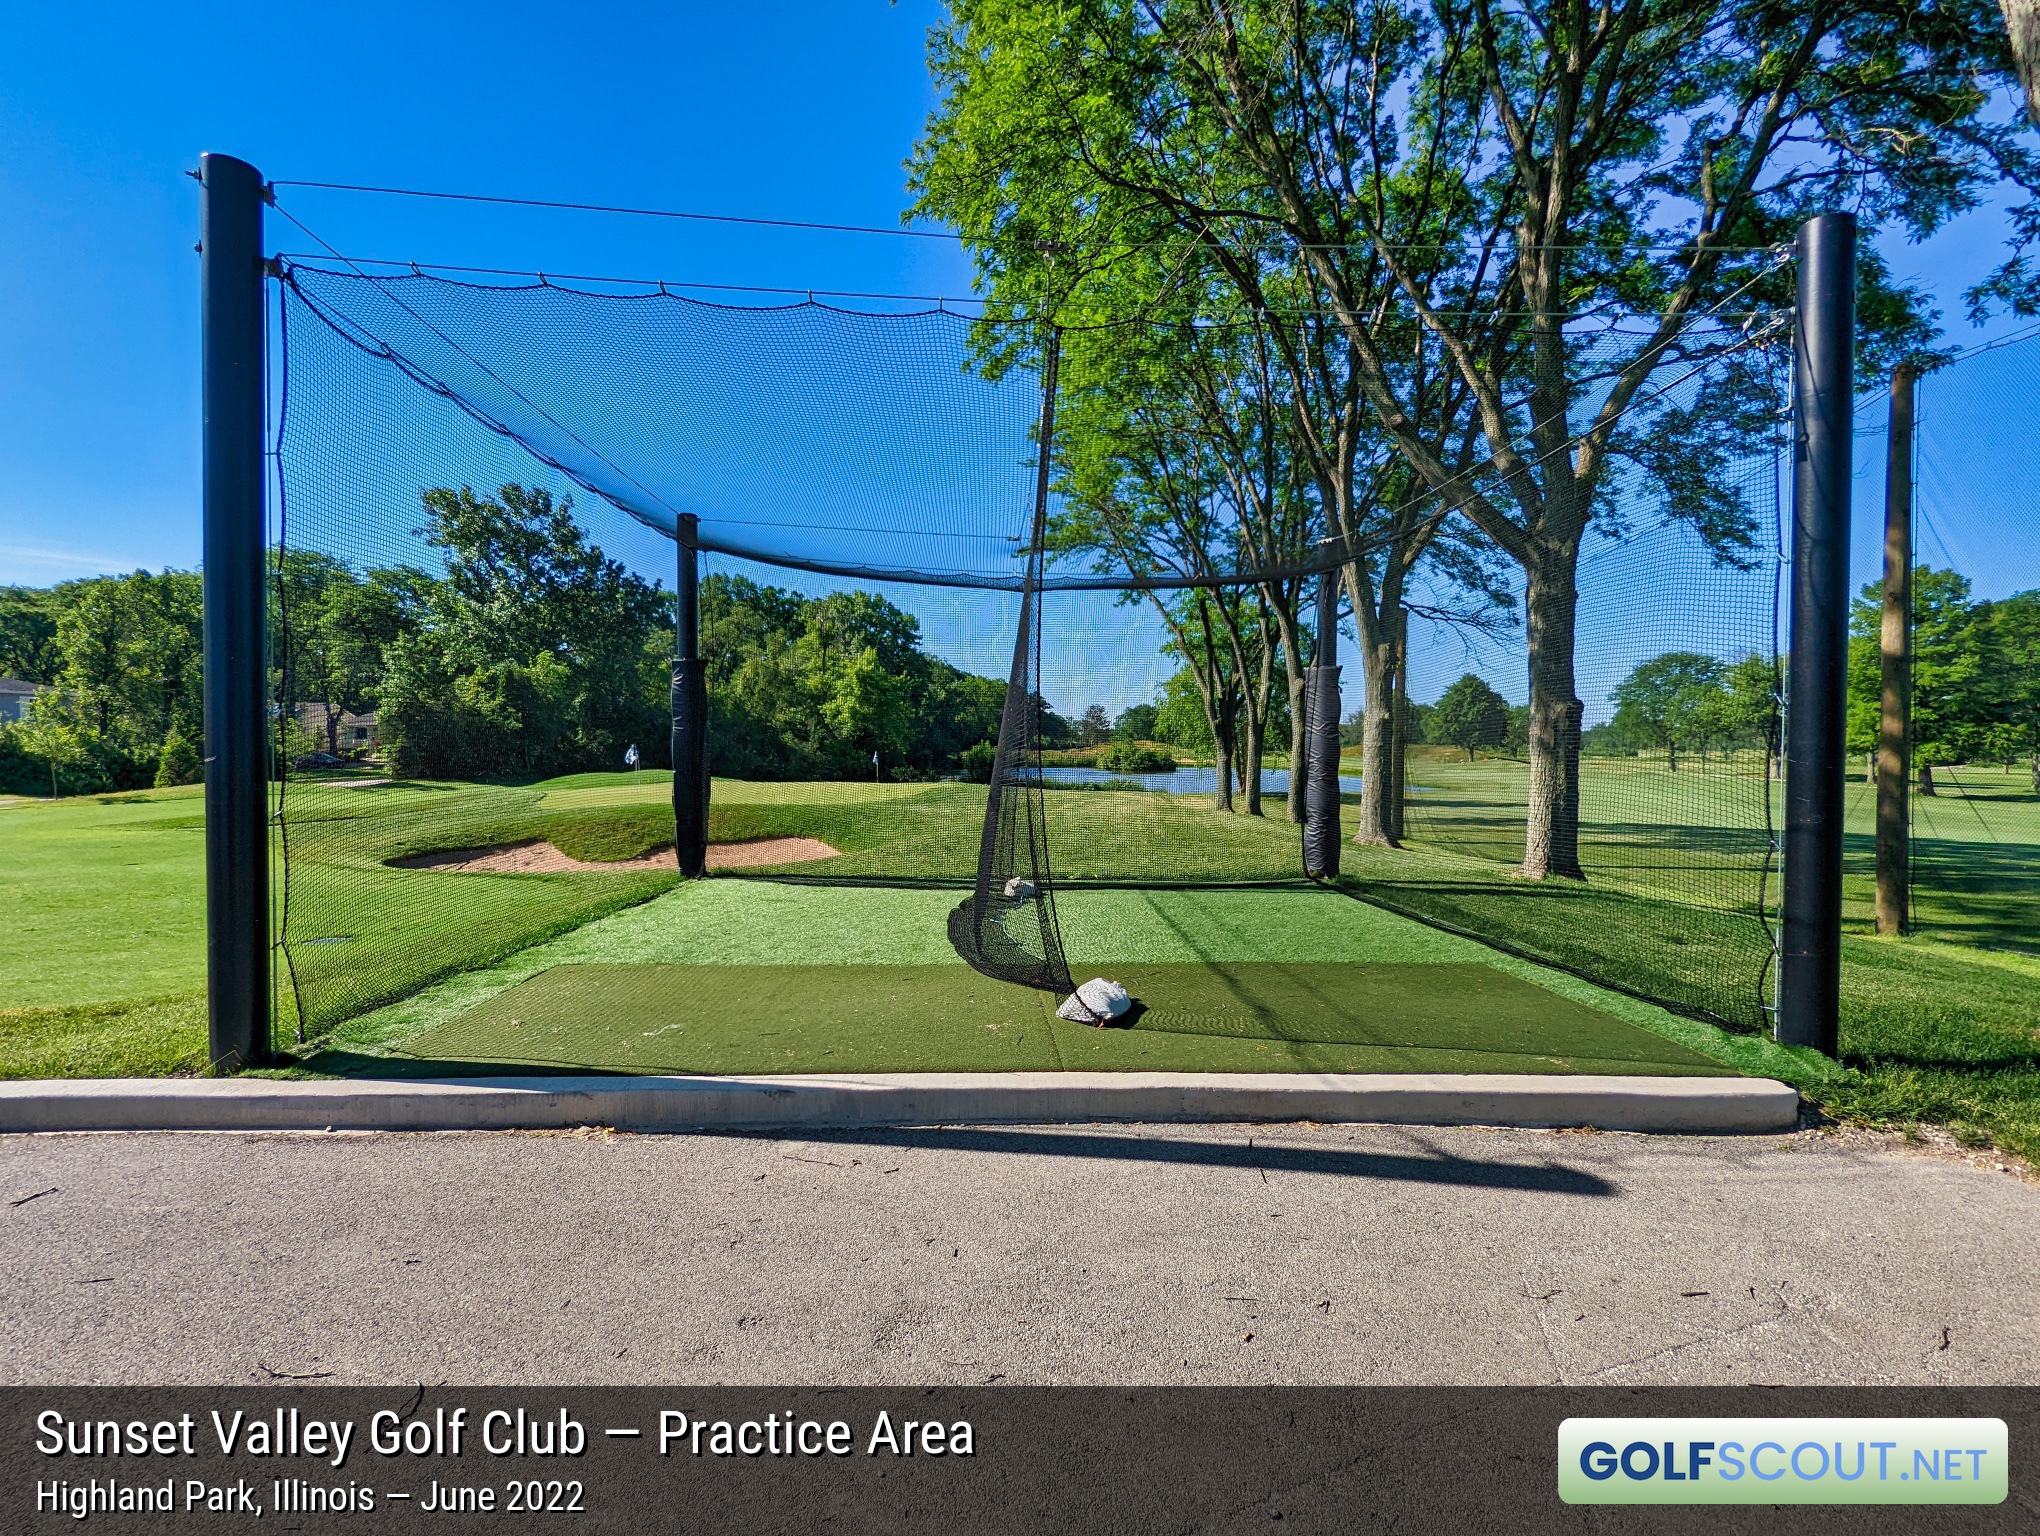 Photo of the practice area at Sunset Valley Golf Club in Highland Park, Illinois. 